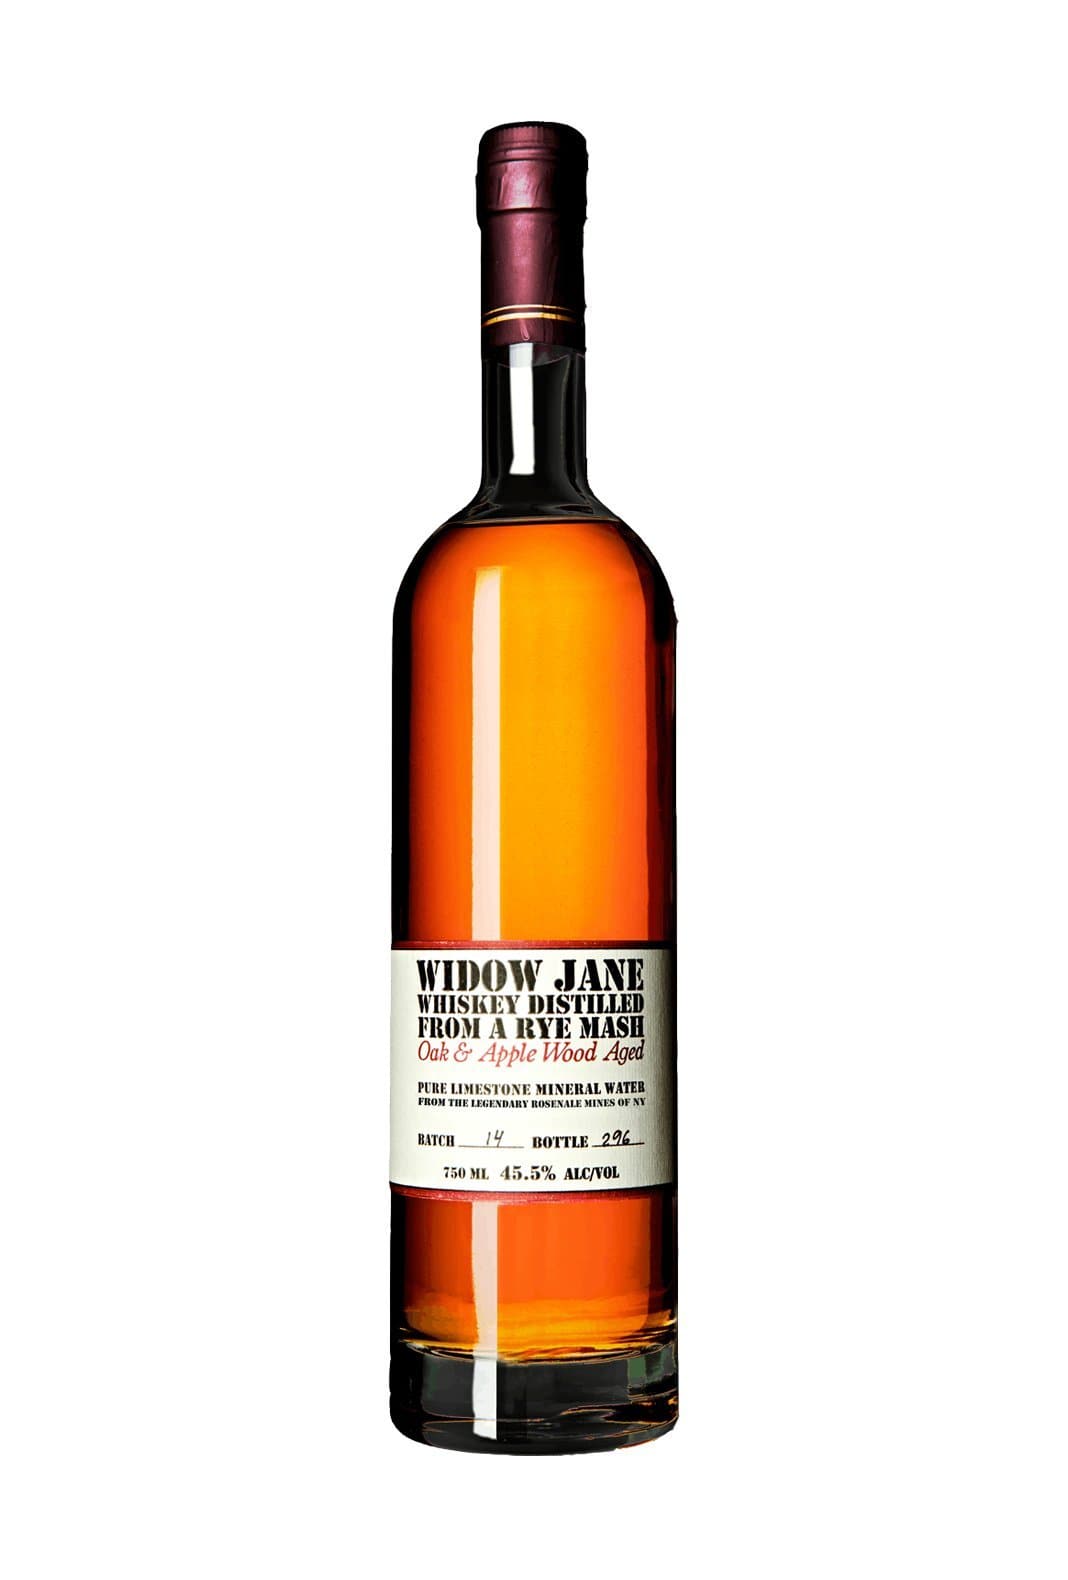 Widow Jane Rye Whiskey Aged American Applewood 10 years 45.5% 750ml | Whiskey | Shop online at Spirits of France